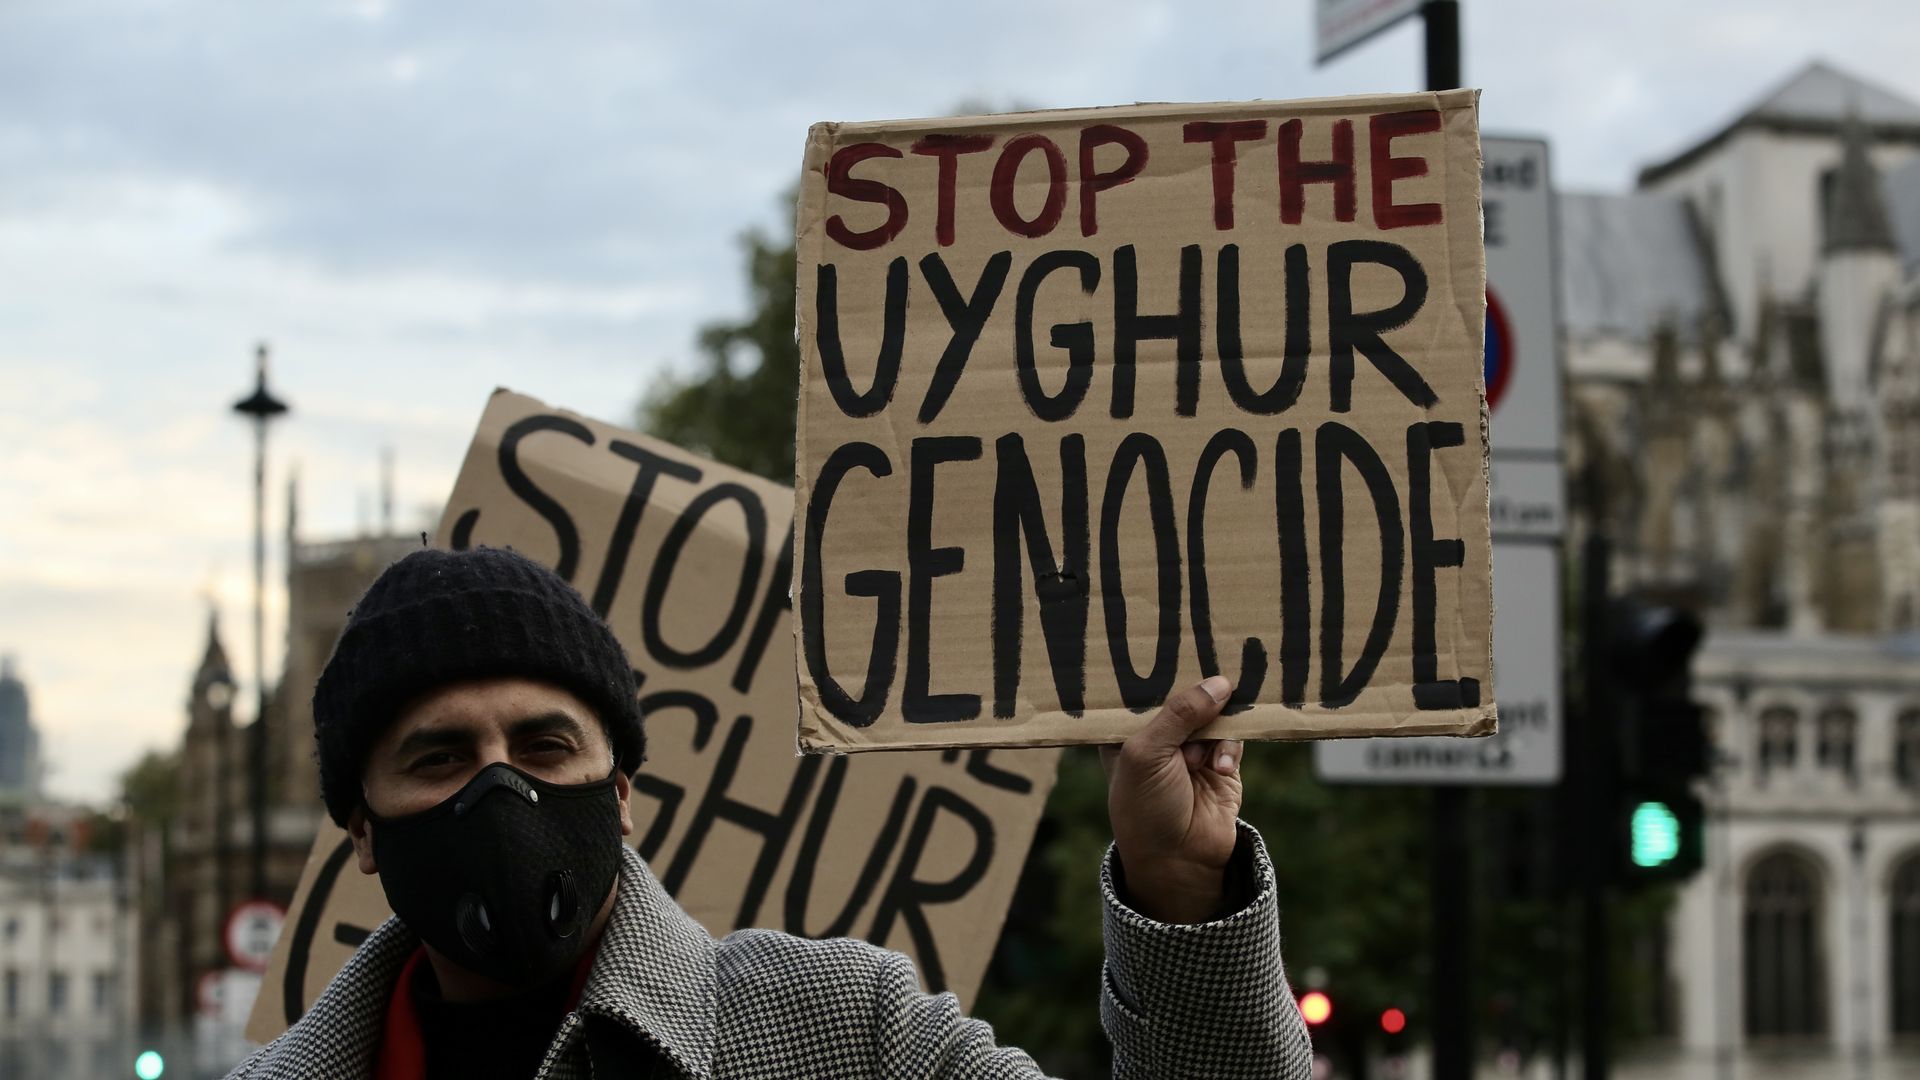 Protester holding Stop the Uyghur Genocide sign